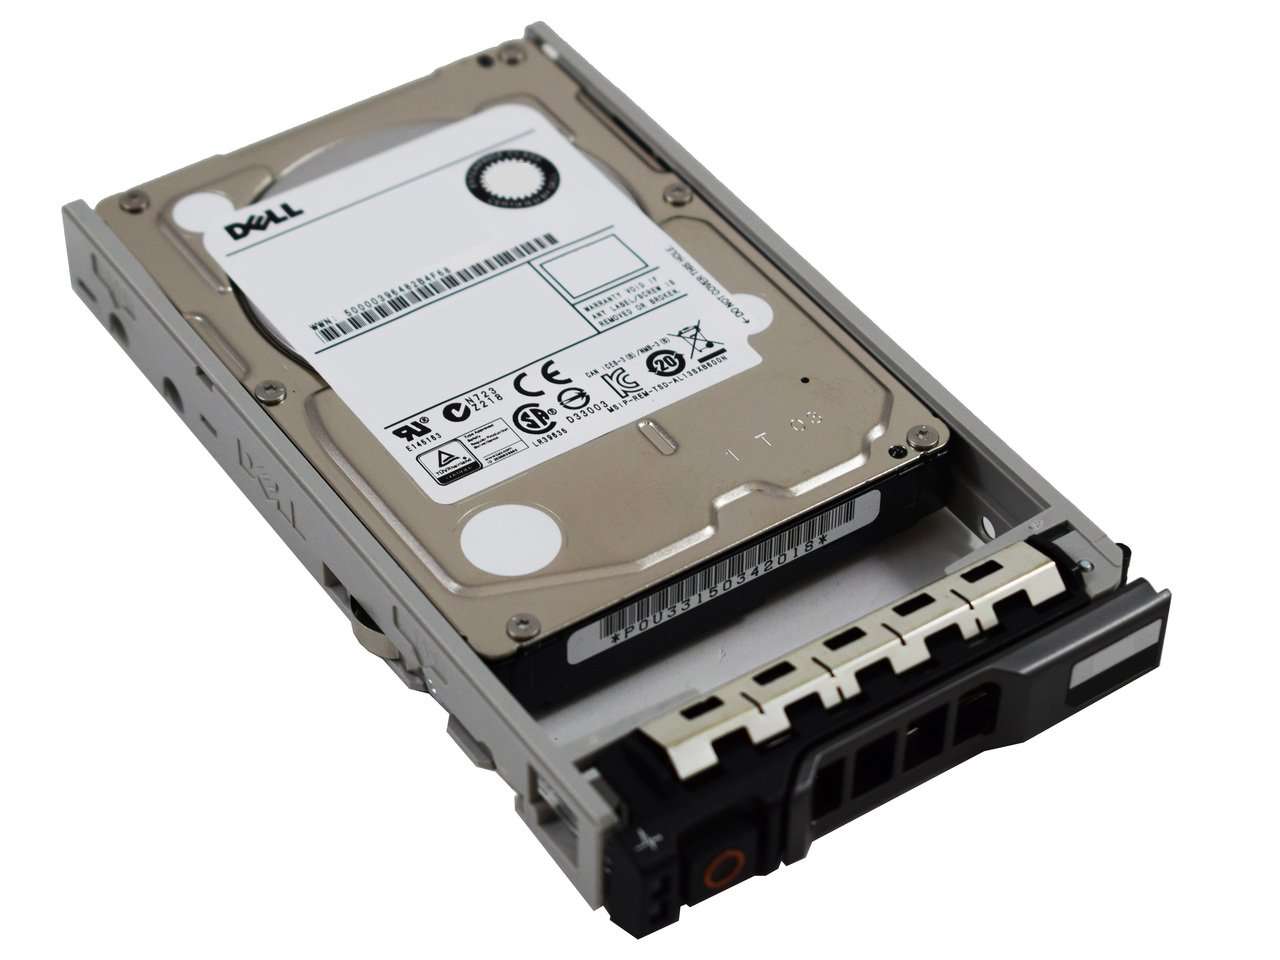 Dell G13 462-6788 600GB 15K RPM SAS 6Gb/s 512n 2.5" Manufacturer Recertified HDD